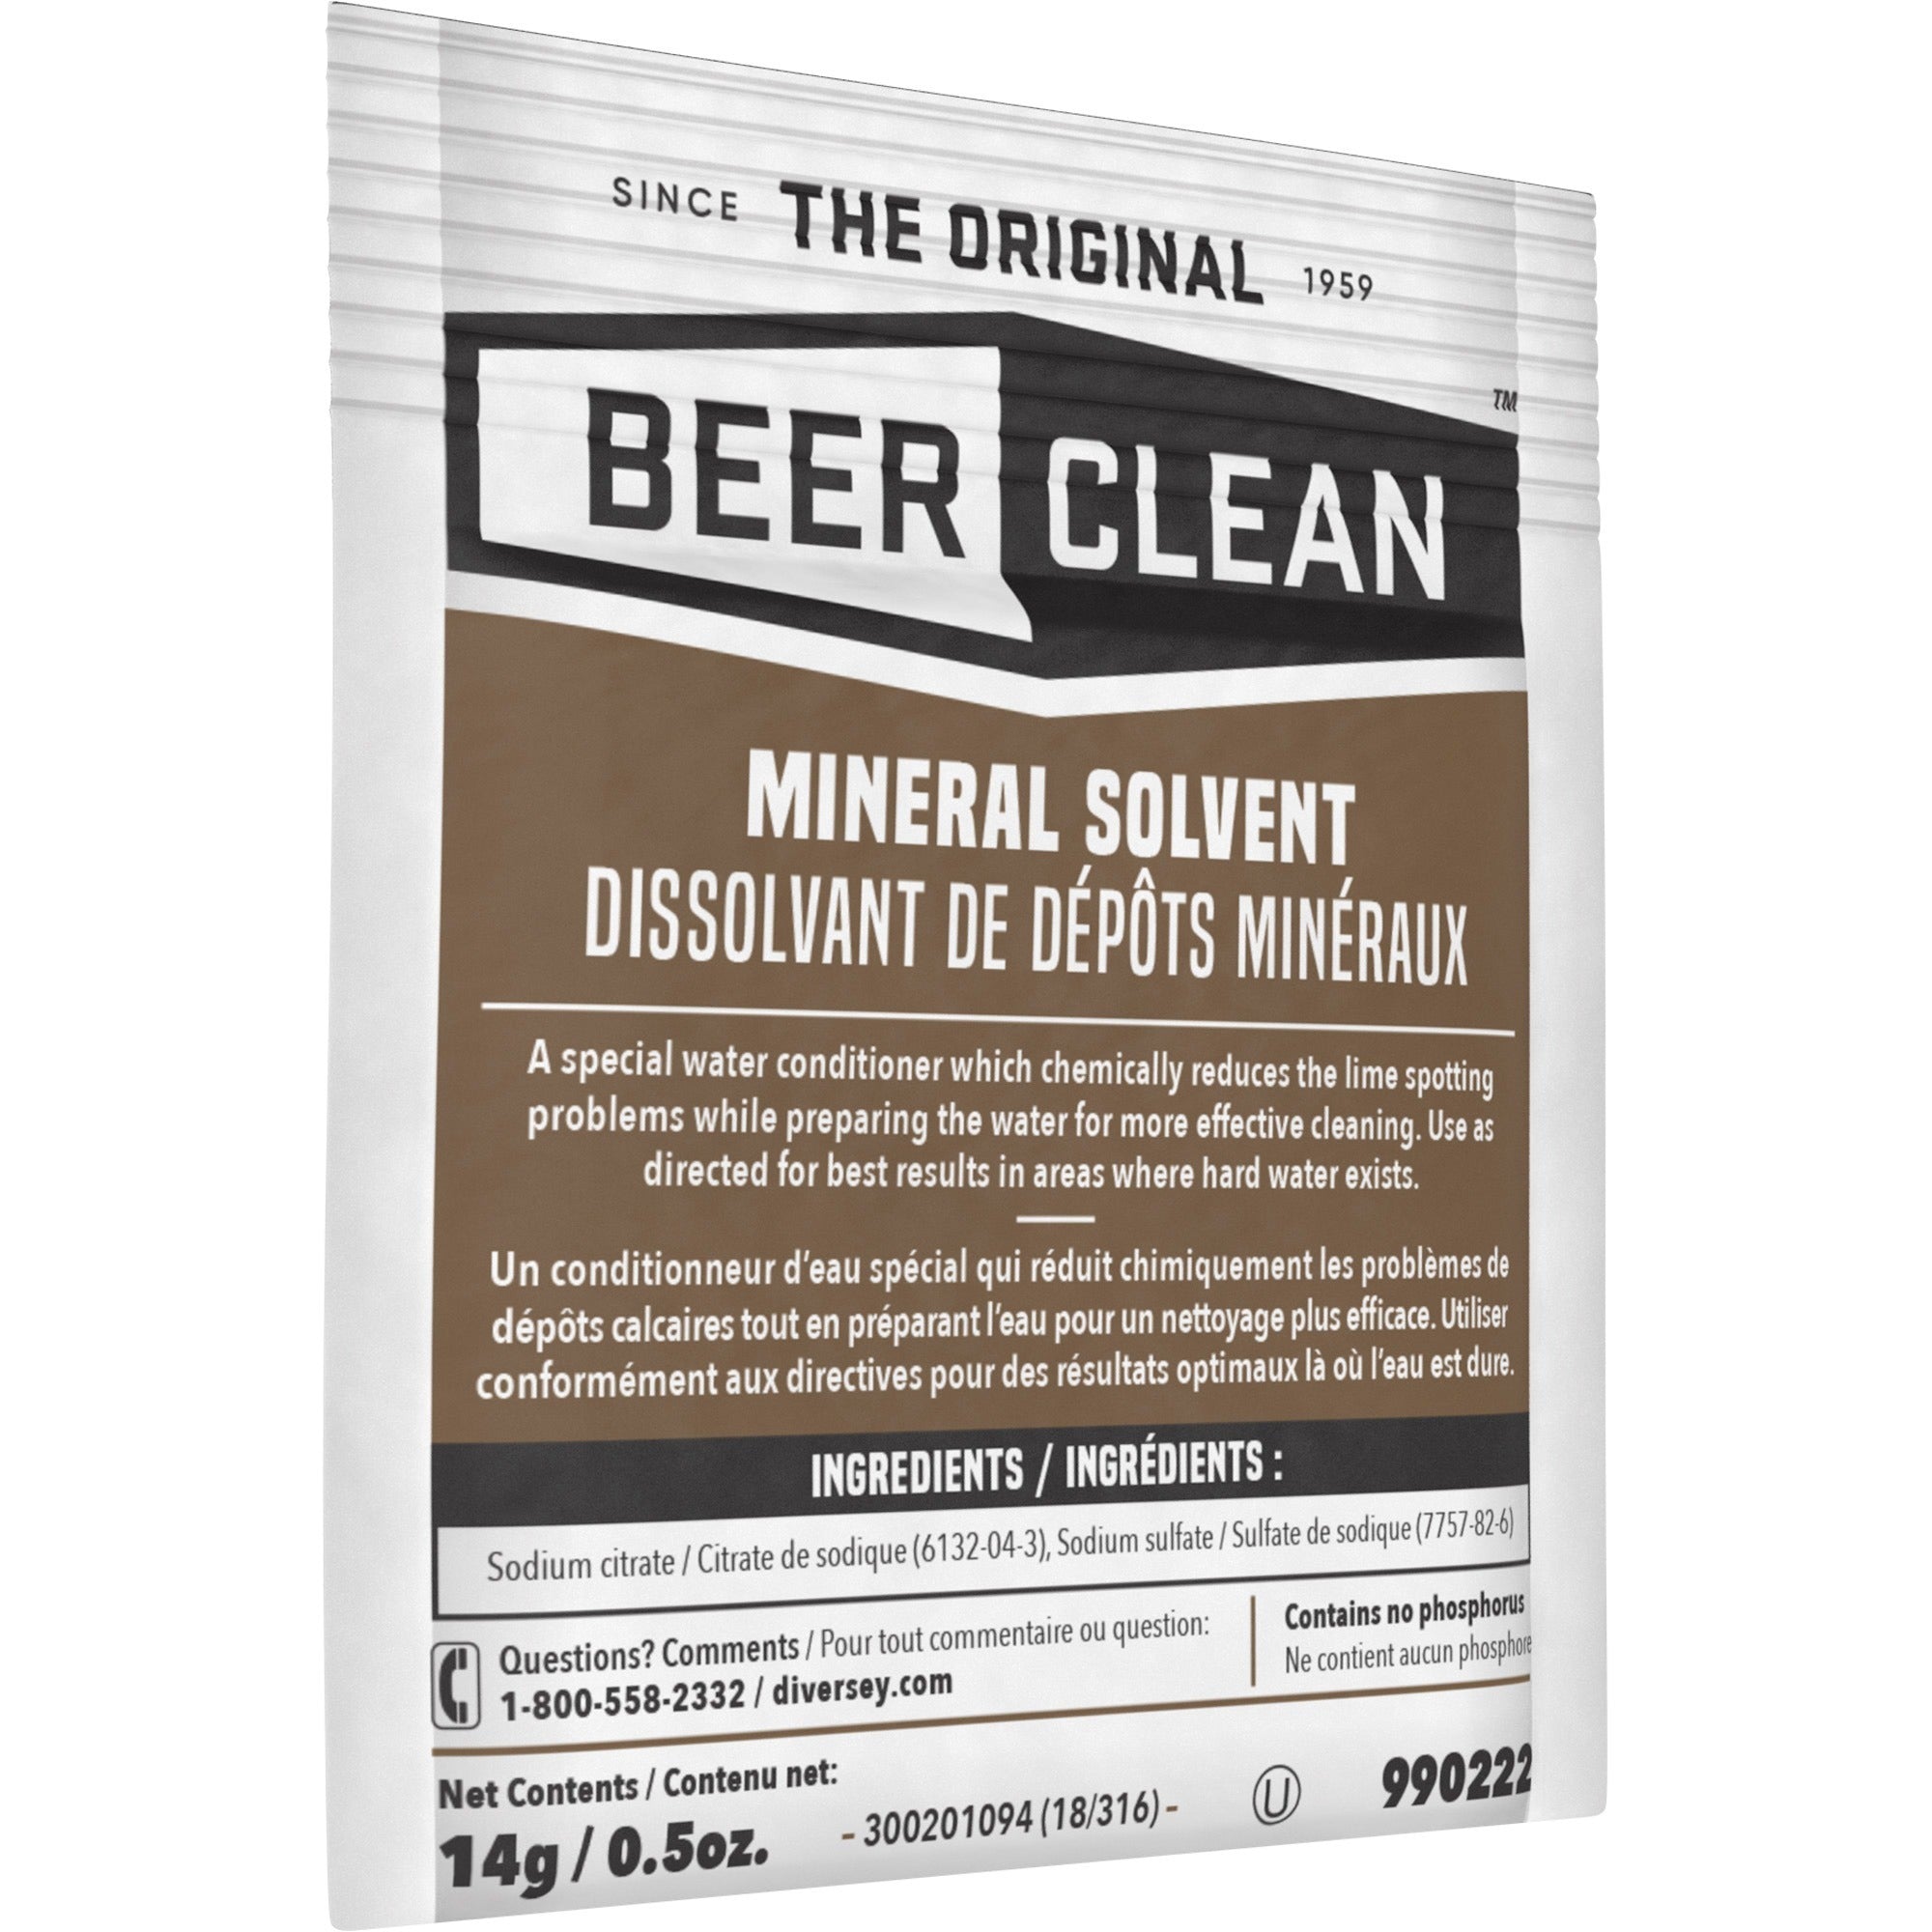 Diversey Beer Clean Mineral Solvent - For Glassware - 0.49 oz (0.03 lb) - 100 / Carton - Odorless, Residue-free - White - 